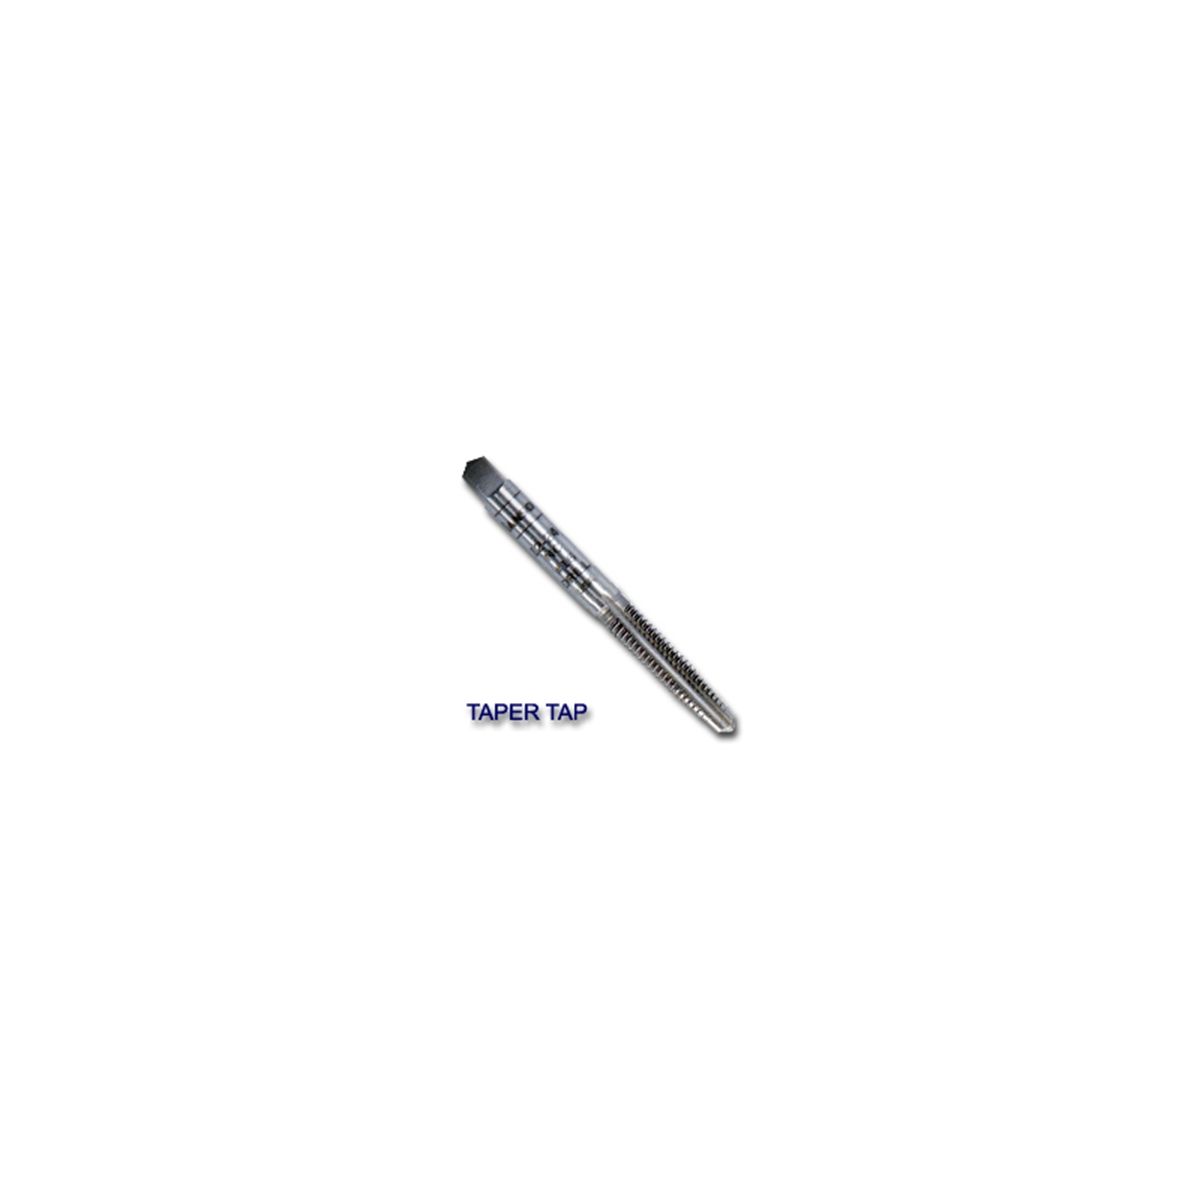 Cut Thread Fractional Taper Tap - 11/16 In -16NS